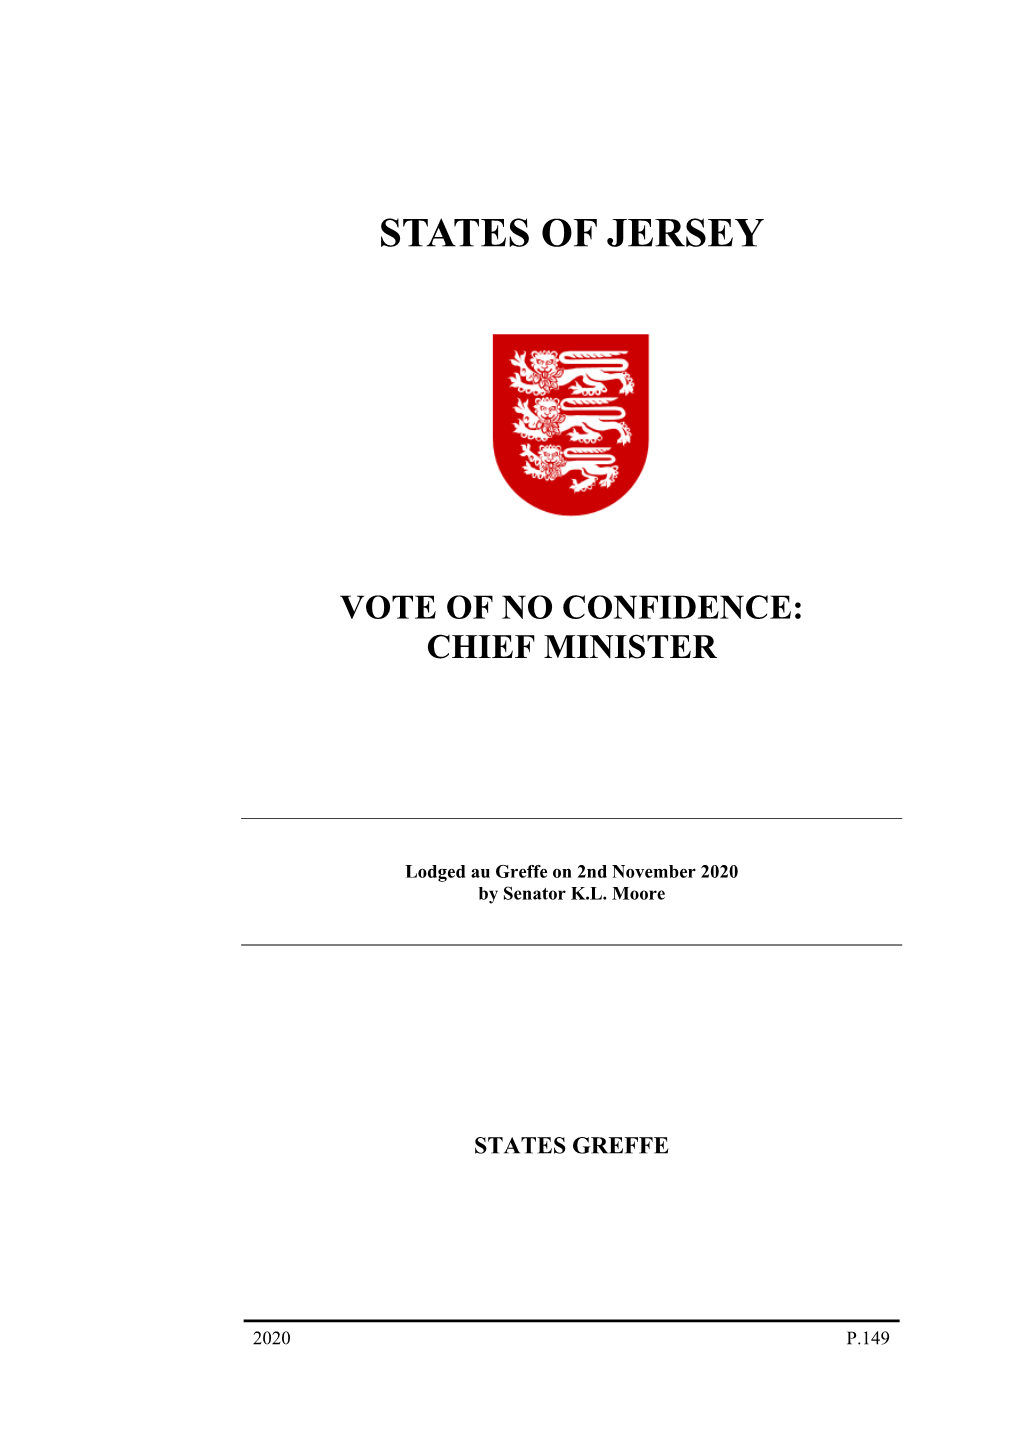 Vote of No Confidence: Chief Minister [P.149-2020]